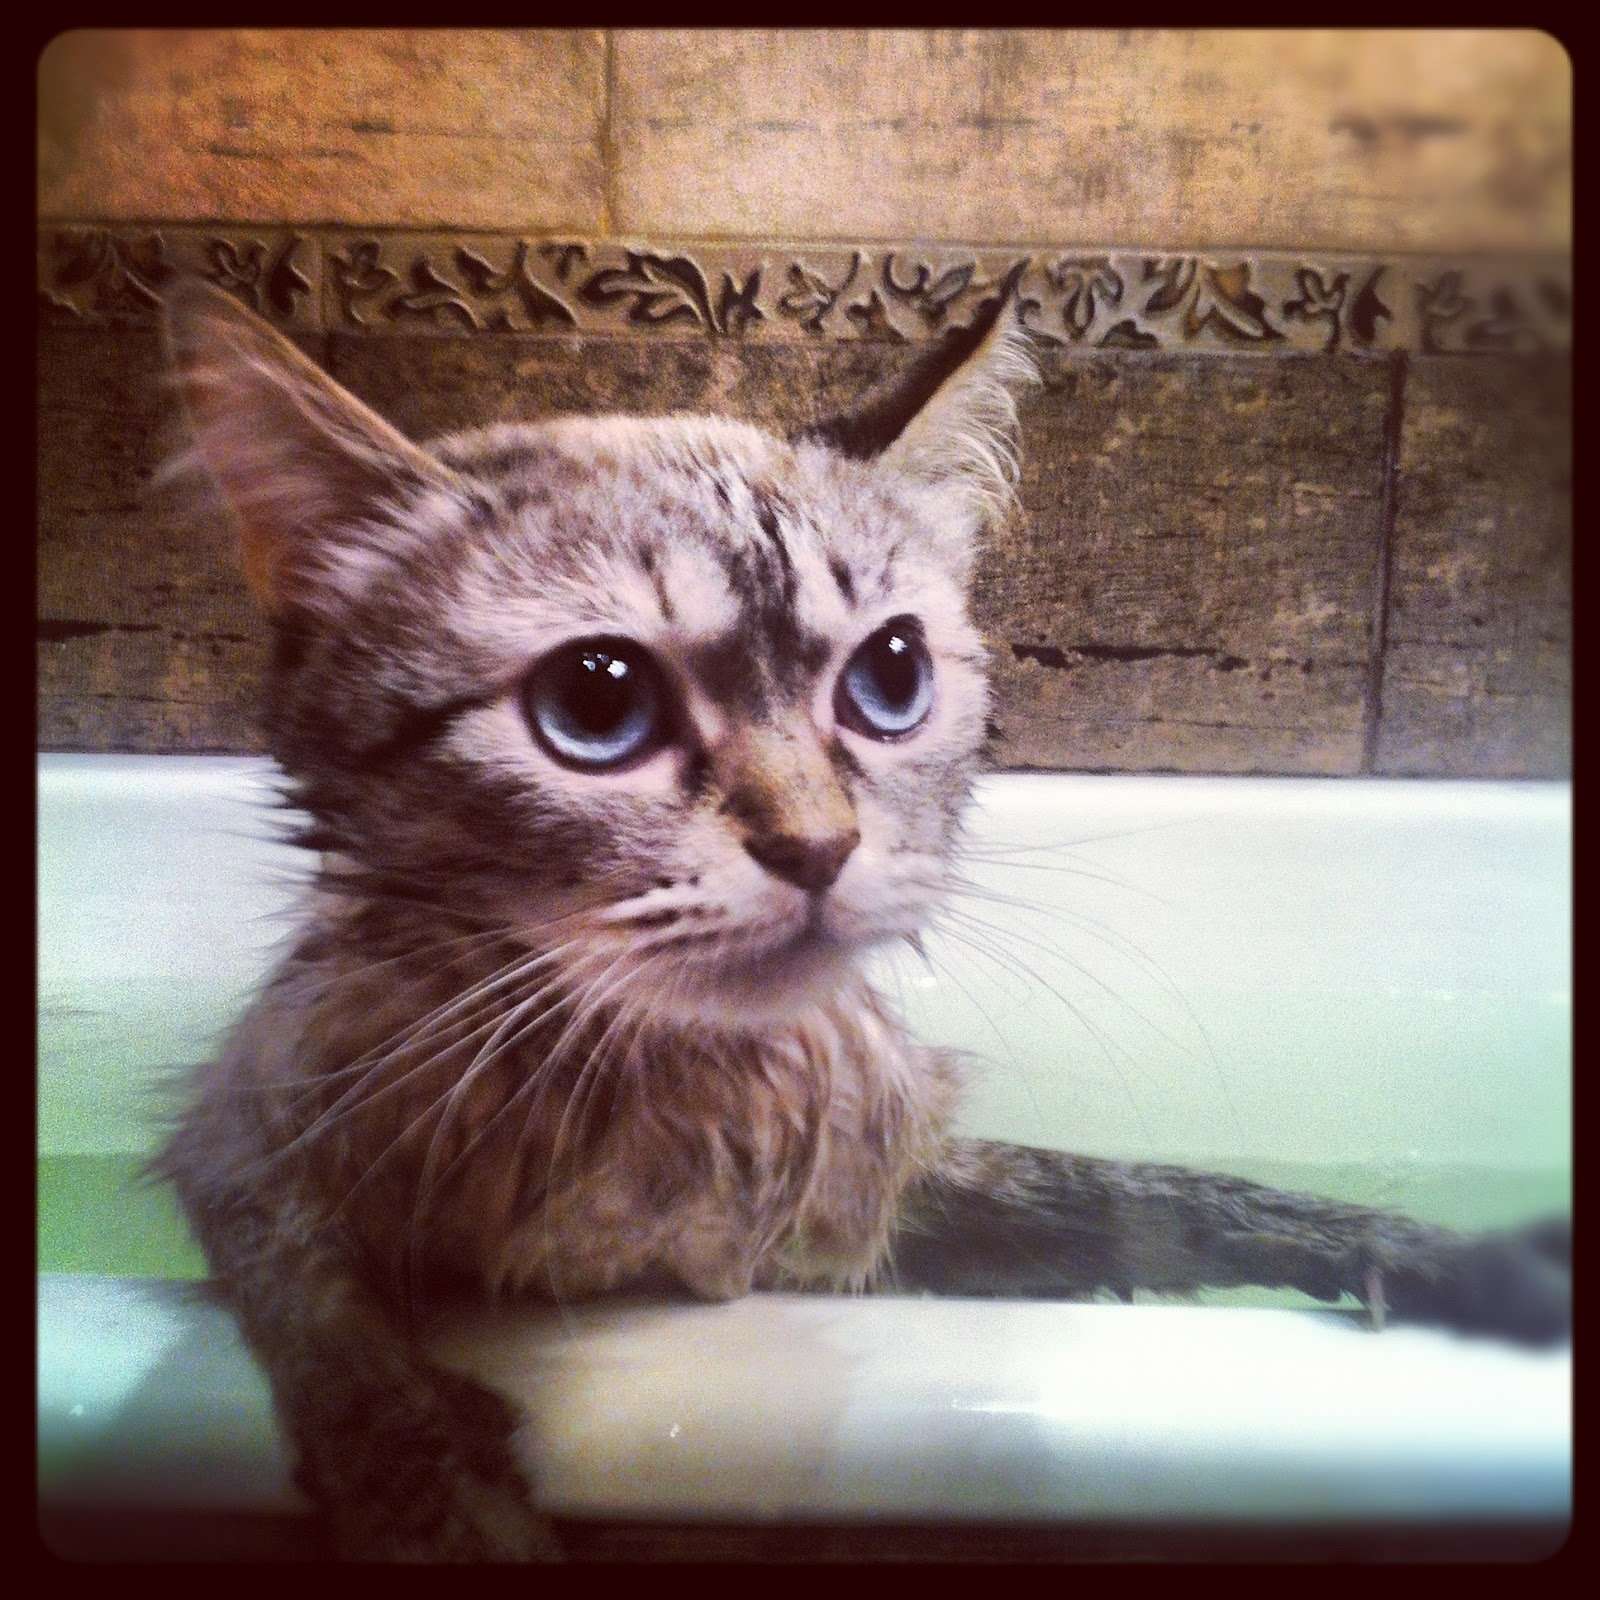 My life and other travels: A Cat in a Bath.